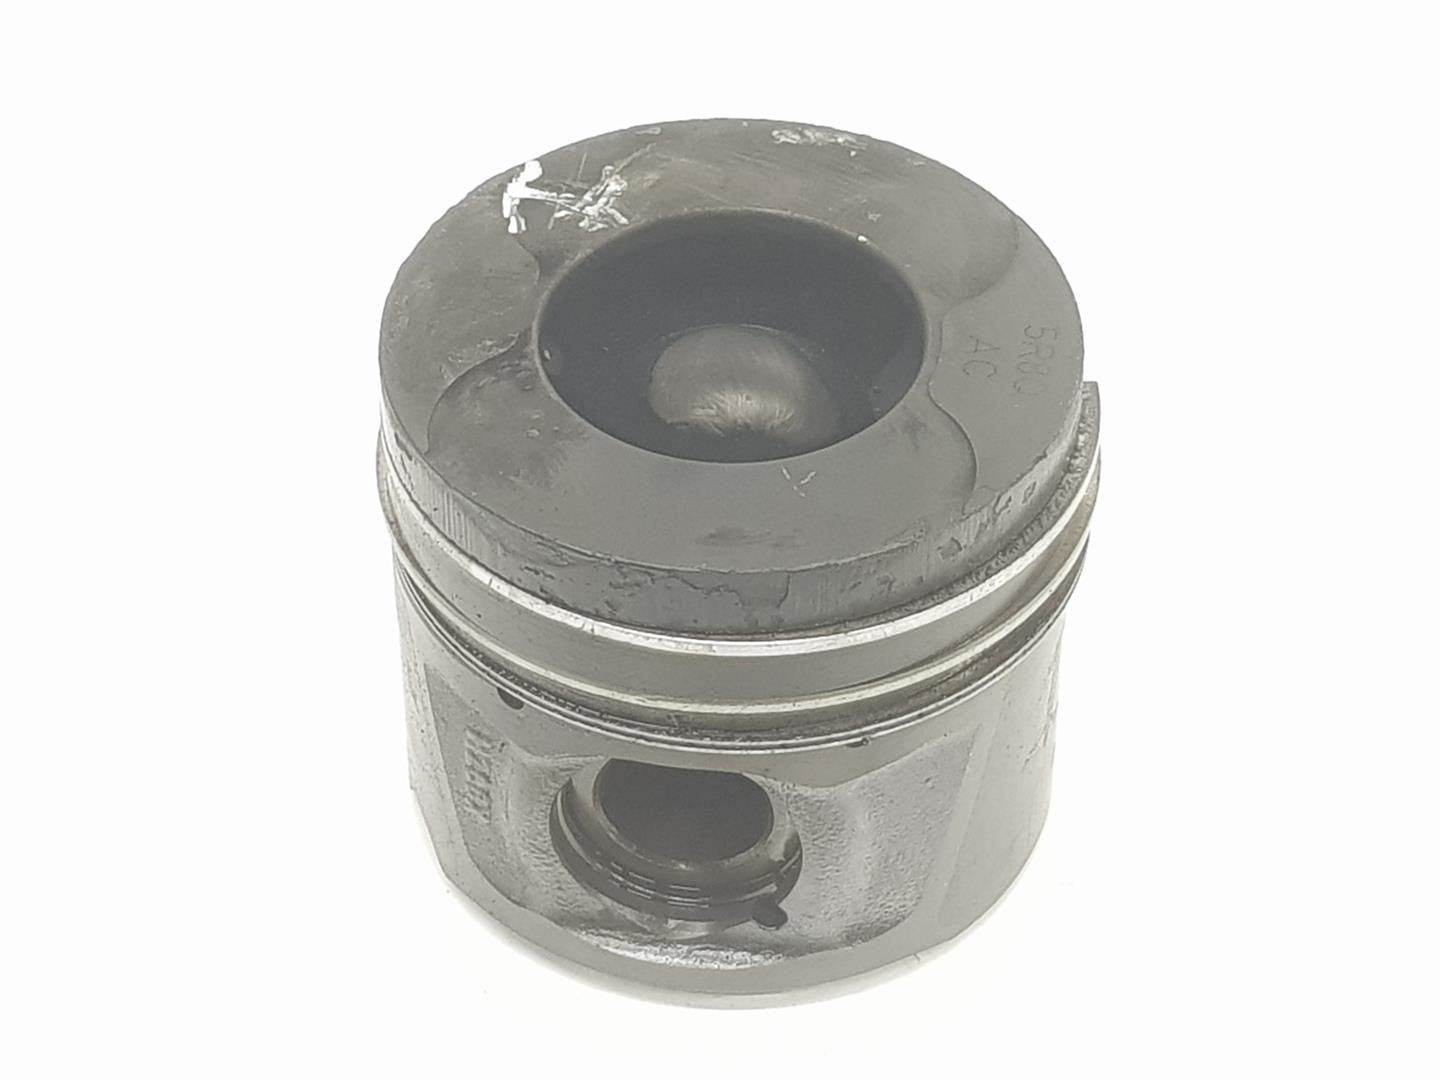 LAND ROVER Discovery 3 generation (2004-2009) Dugattyú PISTON276DT, 276DT, 1111AA 24238330